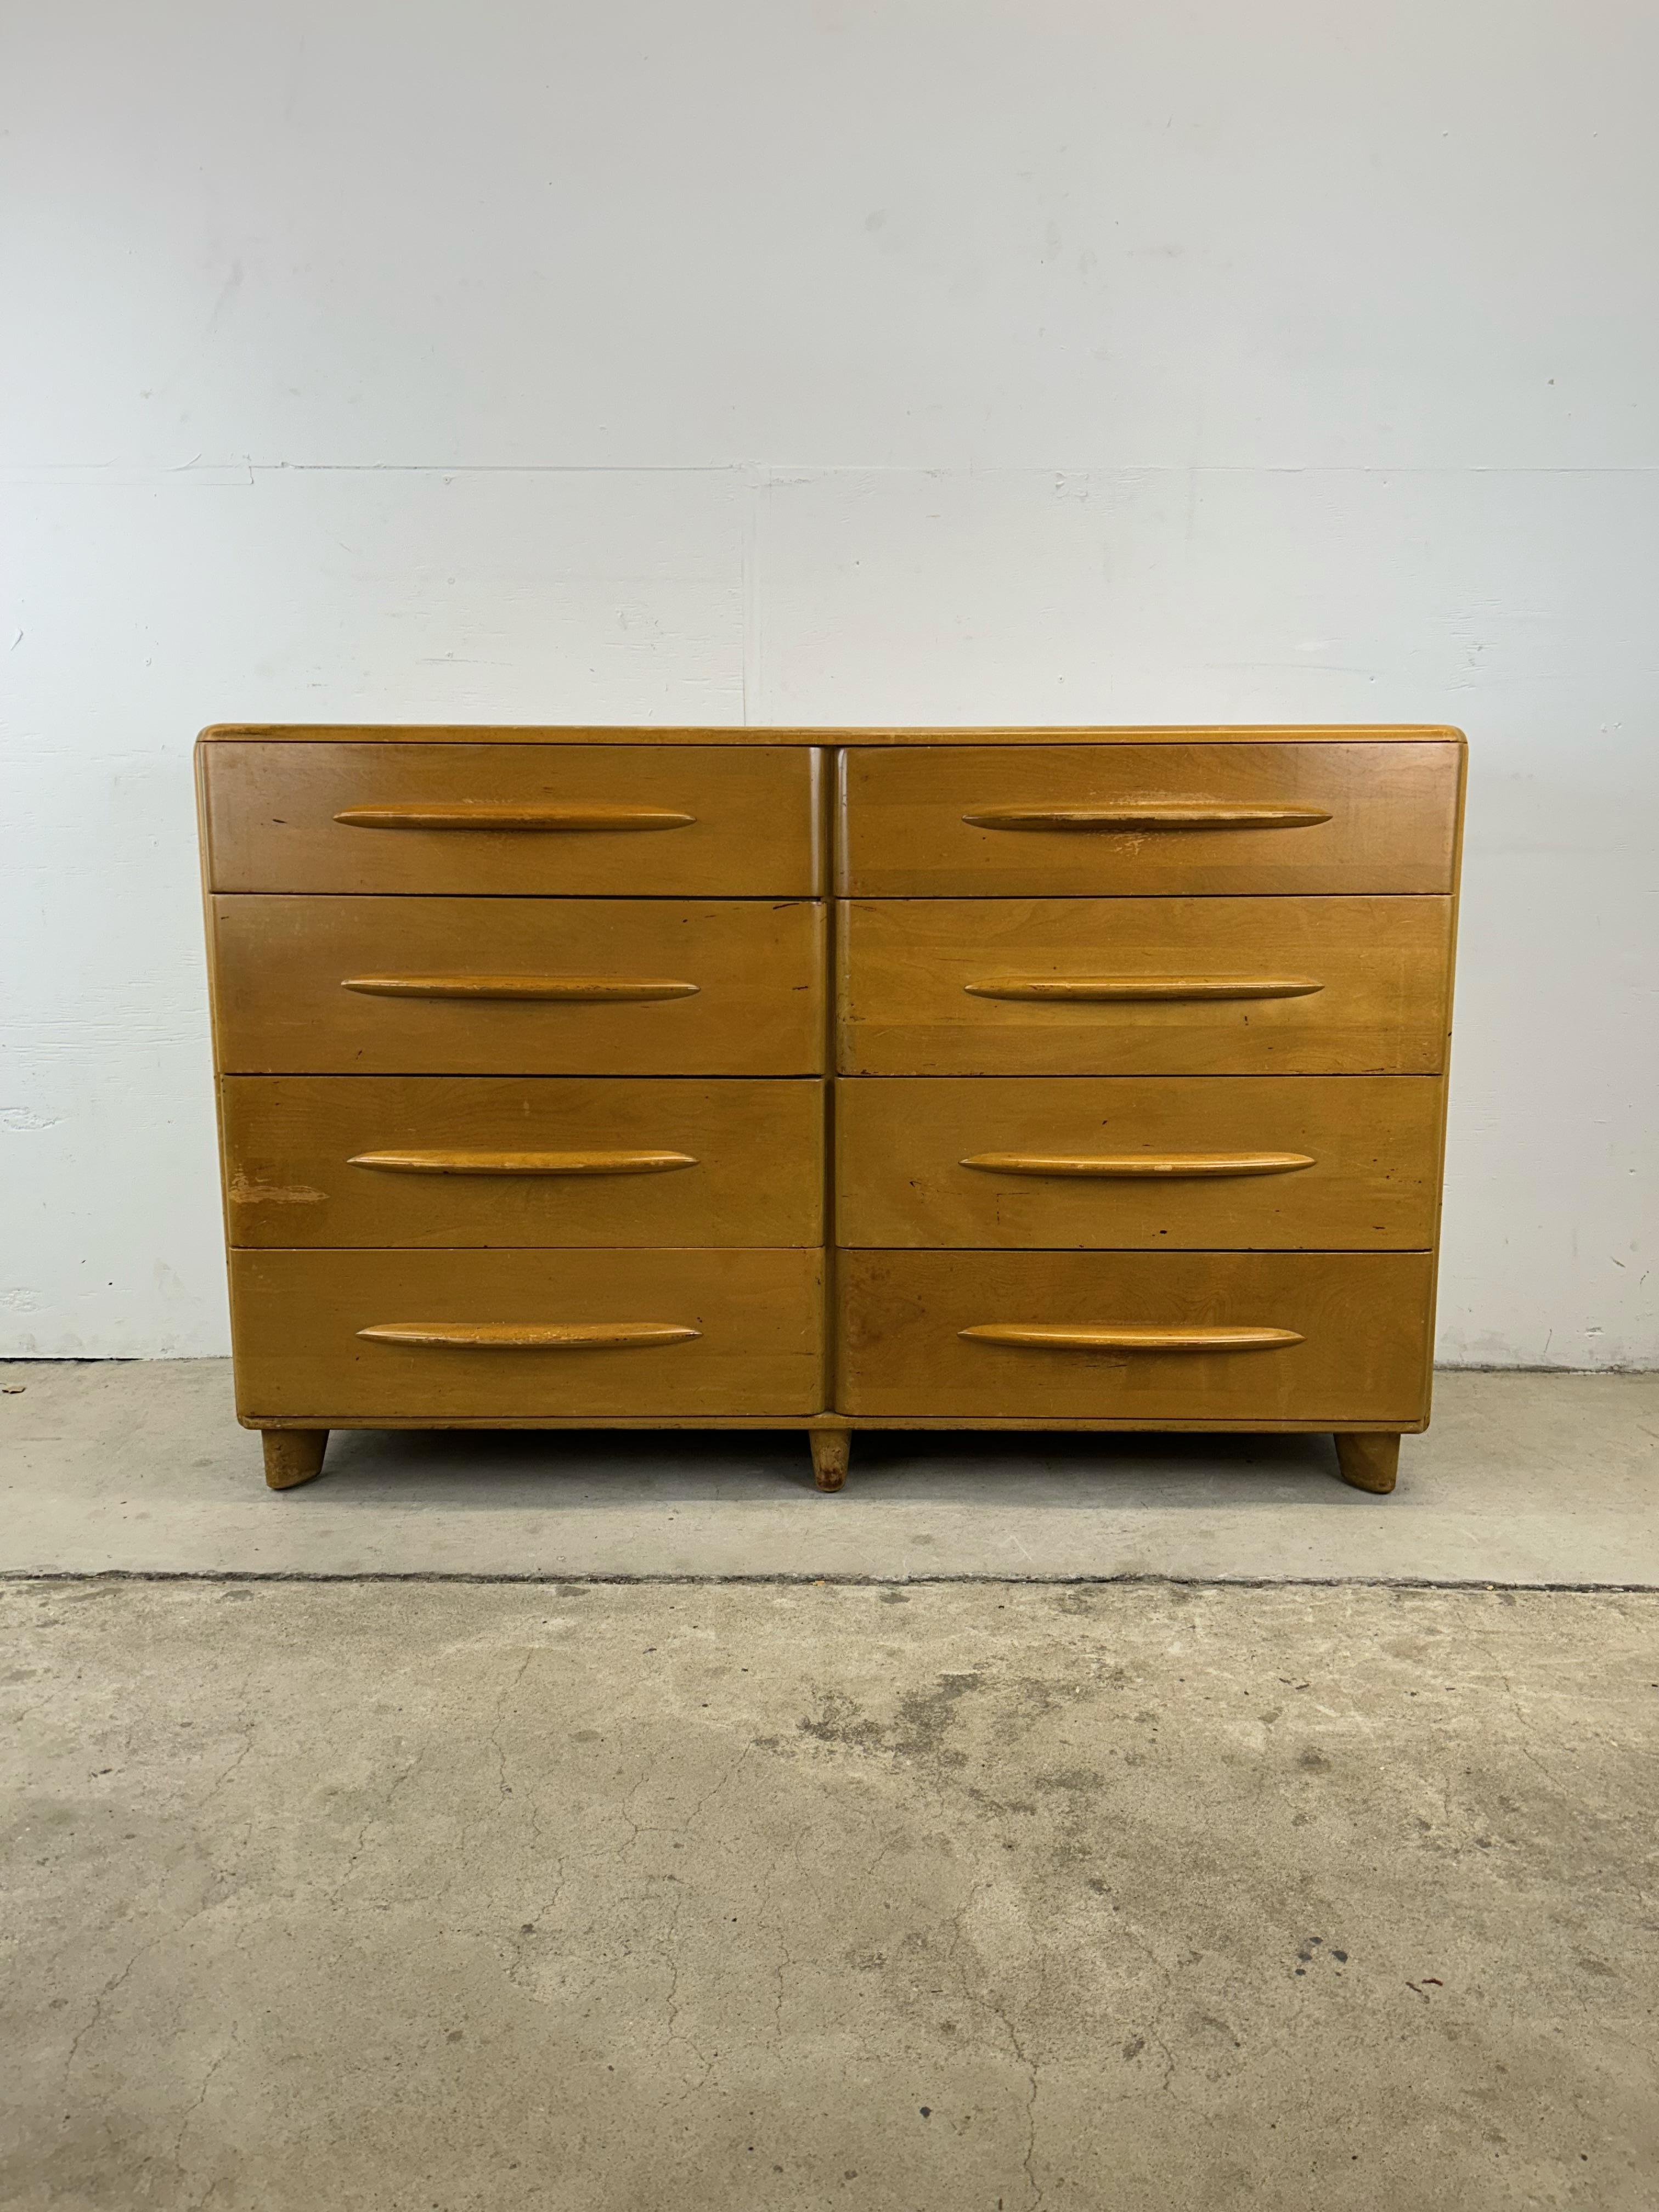 This mid century modern lowboy dresser in the style of Heywood Wakefield features solid maple construction, original champagne finish, eight drawers with carved wood pulls, and unique tapered legs.

Dimensions: 54w 20.5d 34h

Original finish is in